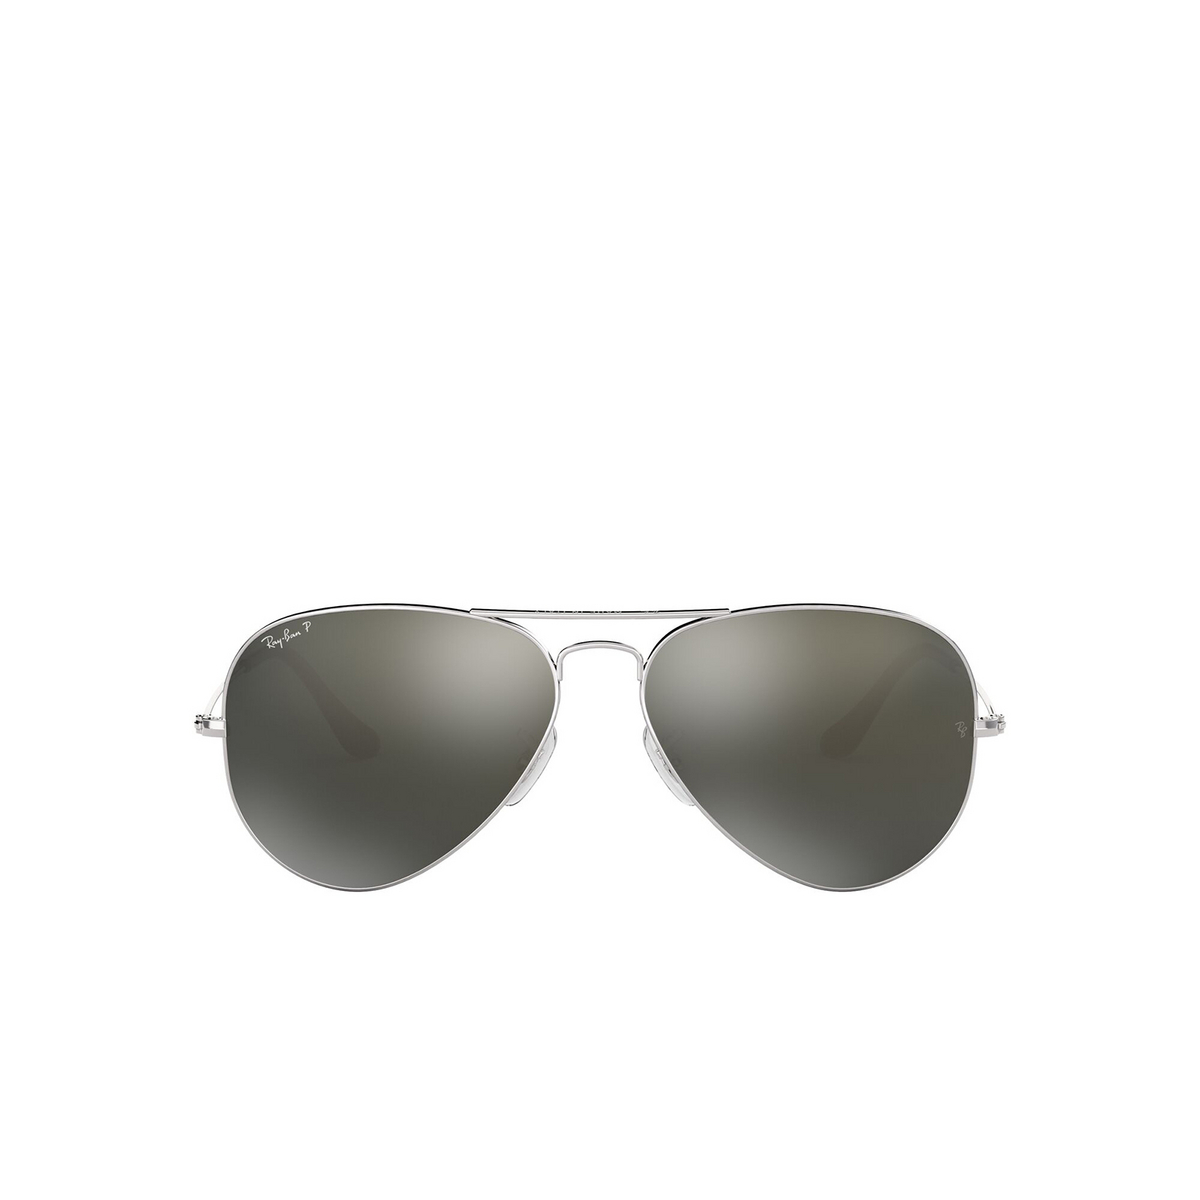 Ray-Ban AVIATOR LARGE METAL Sunglasses 003/59 Silver - front view